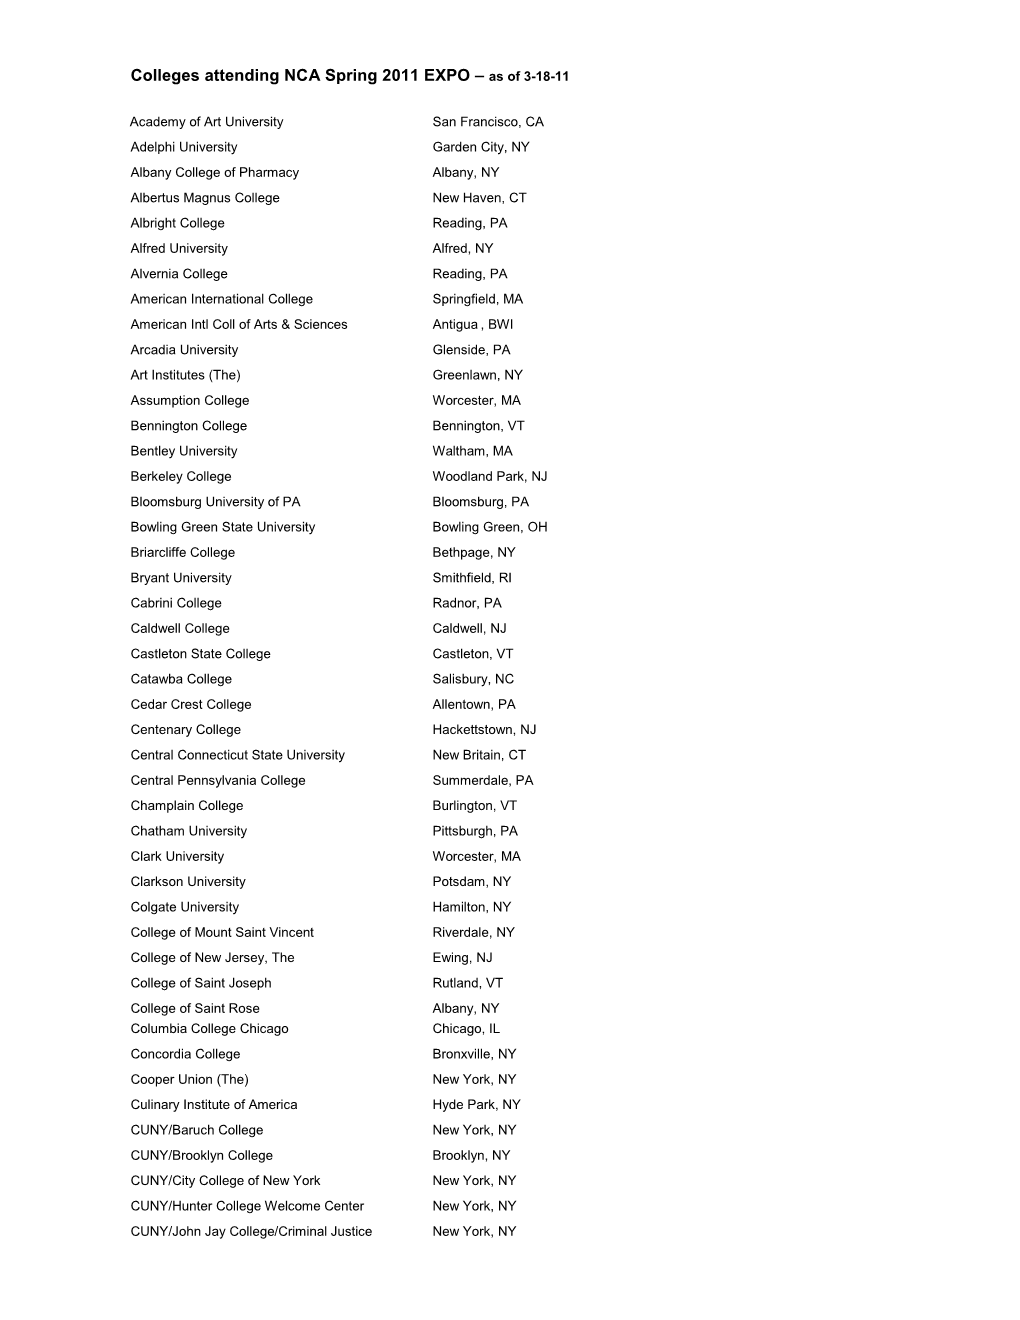 Colleges Attending NCA Spring 2011 EXPO – As of 3-18-11